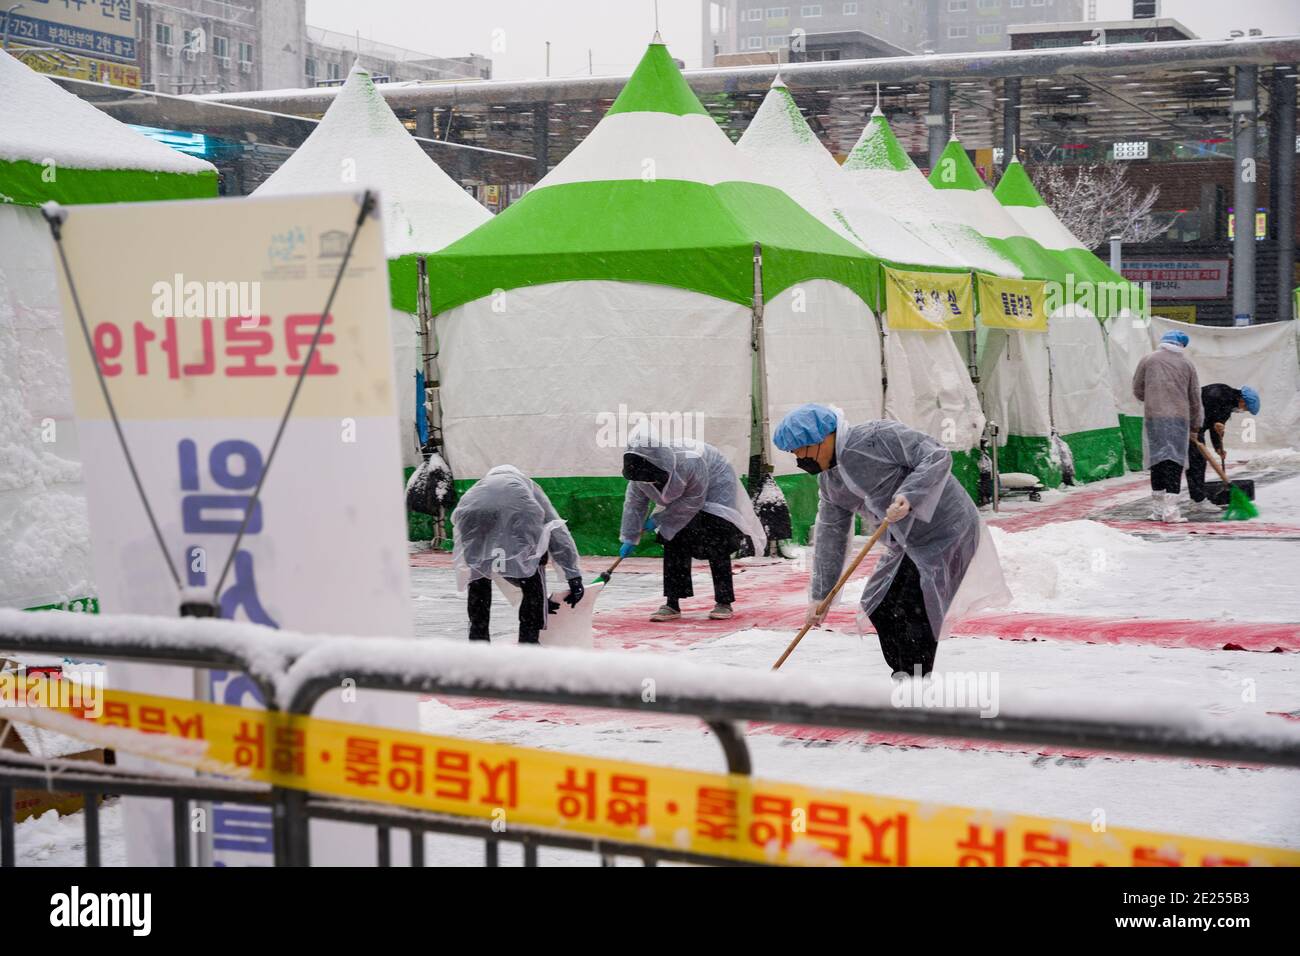 Bucheon, Bucheon, South Korea. 12th Jan, 2021. Workers at a coronavirus testing center in front of Bucheon Station in South Korea clean snow from the facility Tuesday, Jan. 12, 2021. Credit: Jintak Han/ZUMA Wire/Alamy Live News Stock Photo